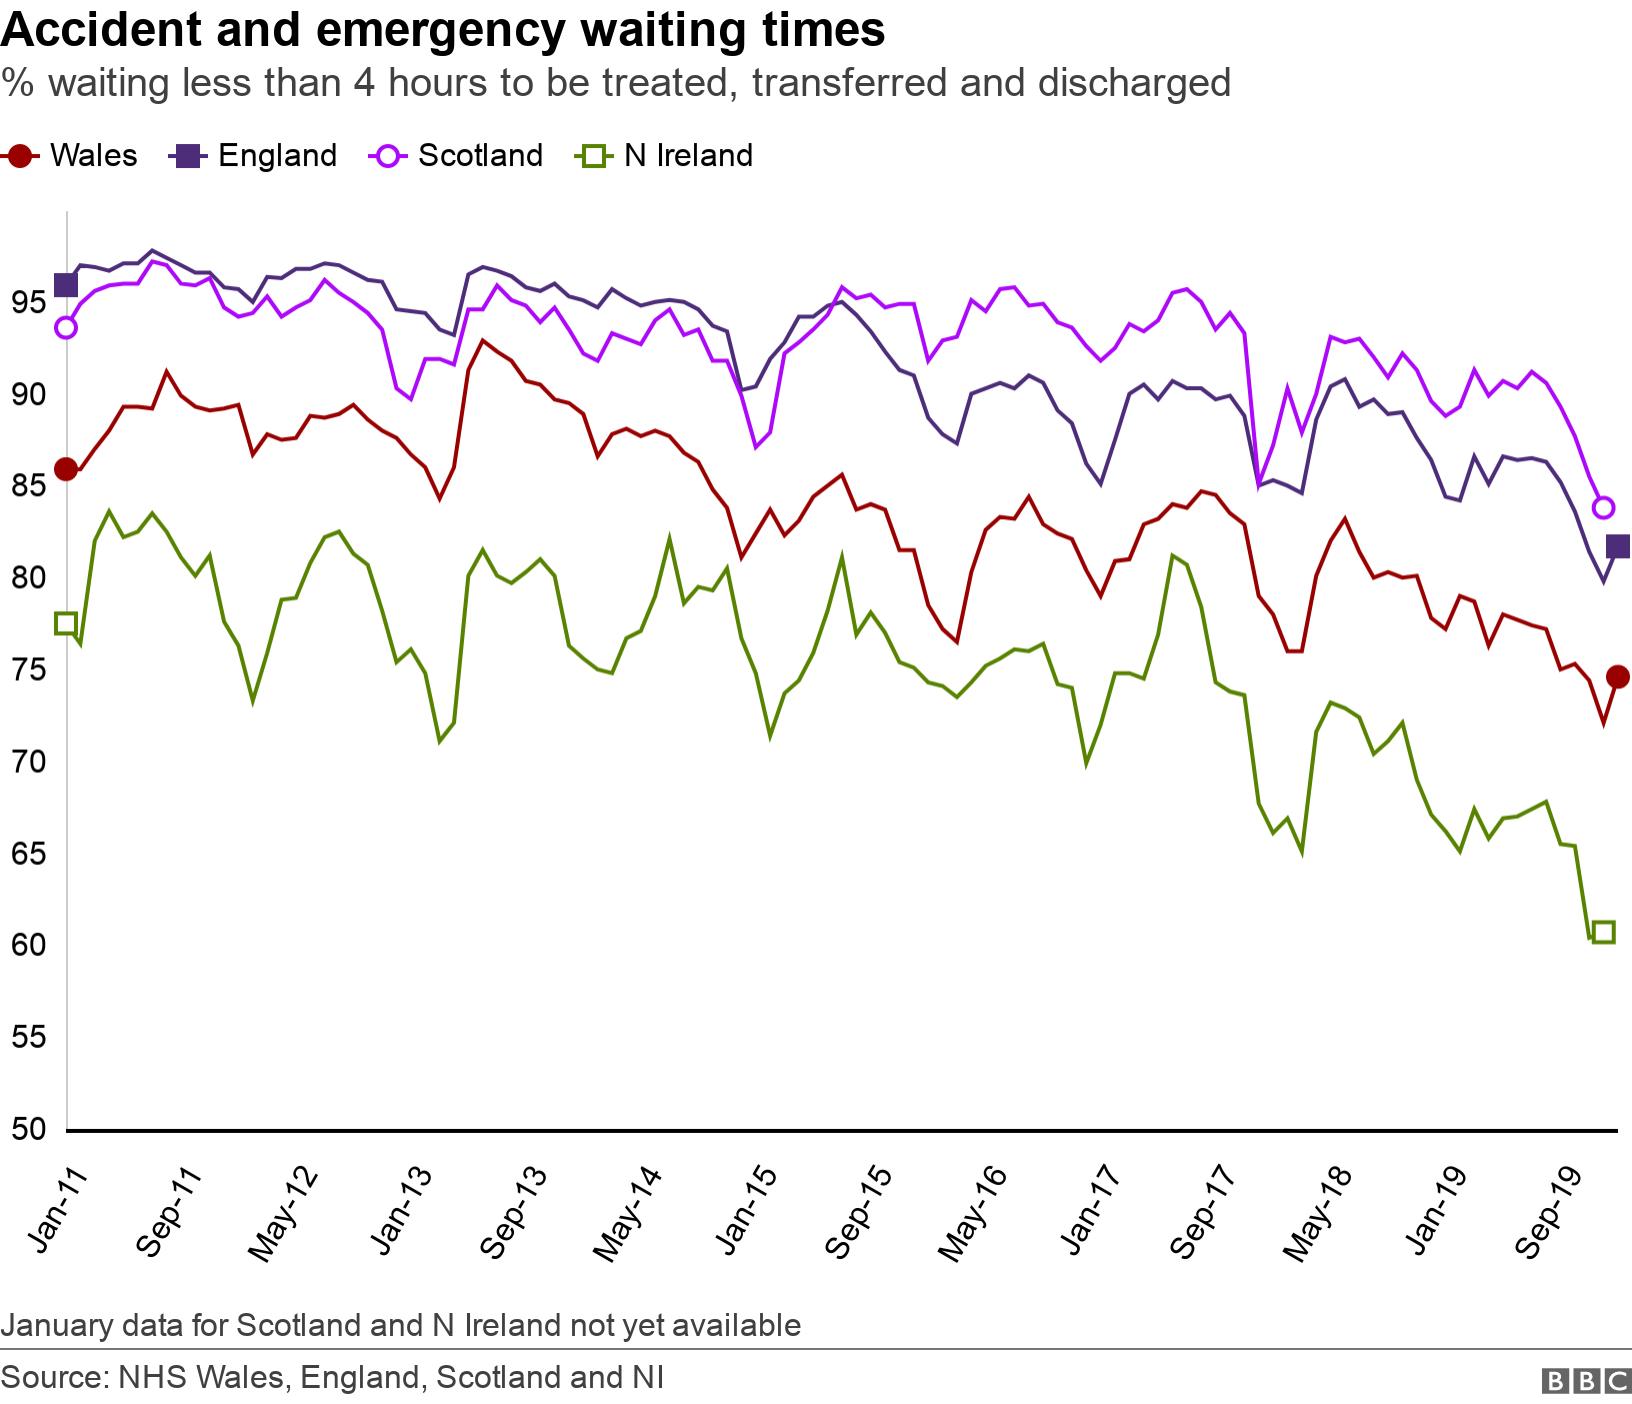 Accident and emergency waiting times. % waiting less than 4 hours to be treated, transferred and discharged. January data for Scotland and N Ireland not yet available.